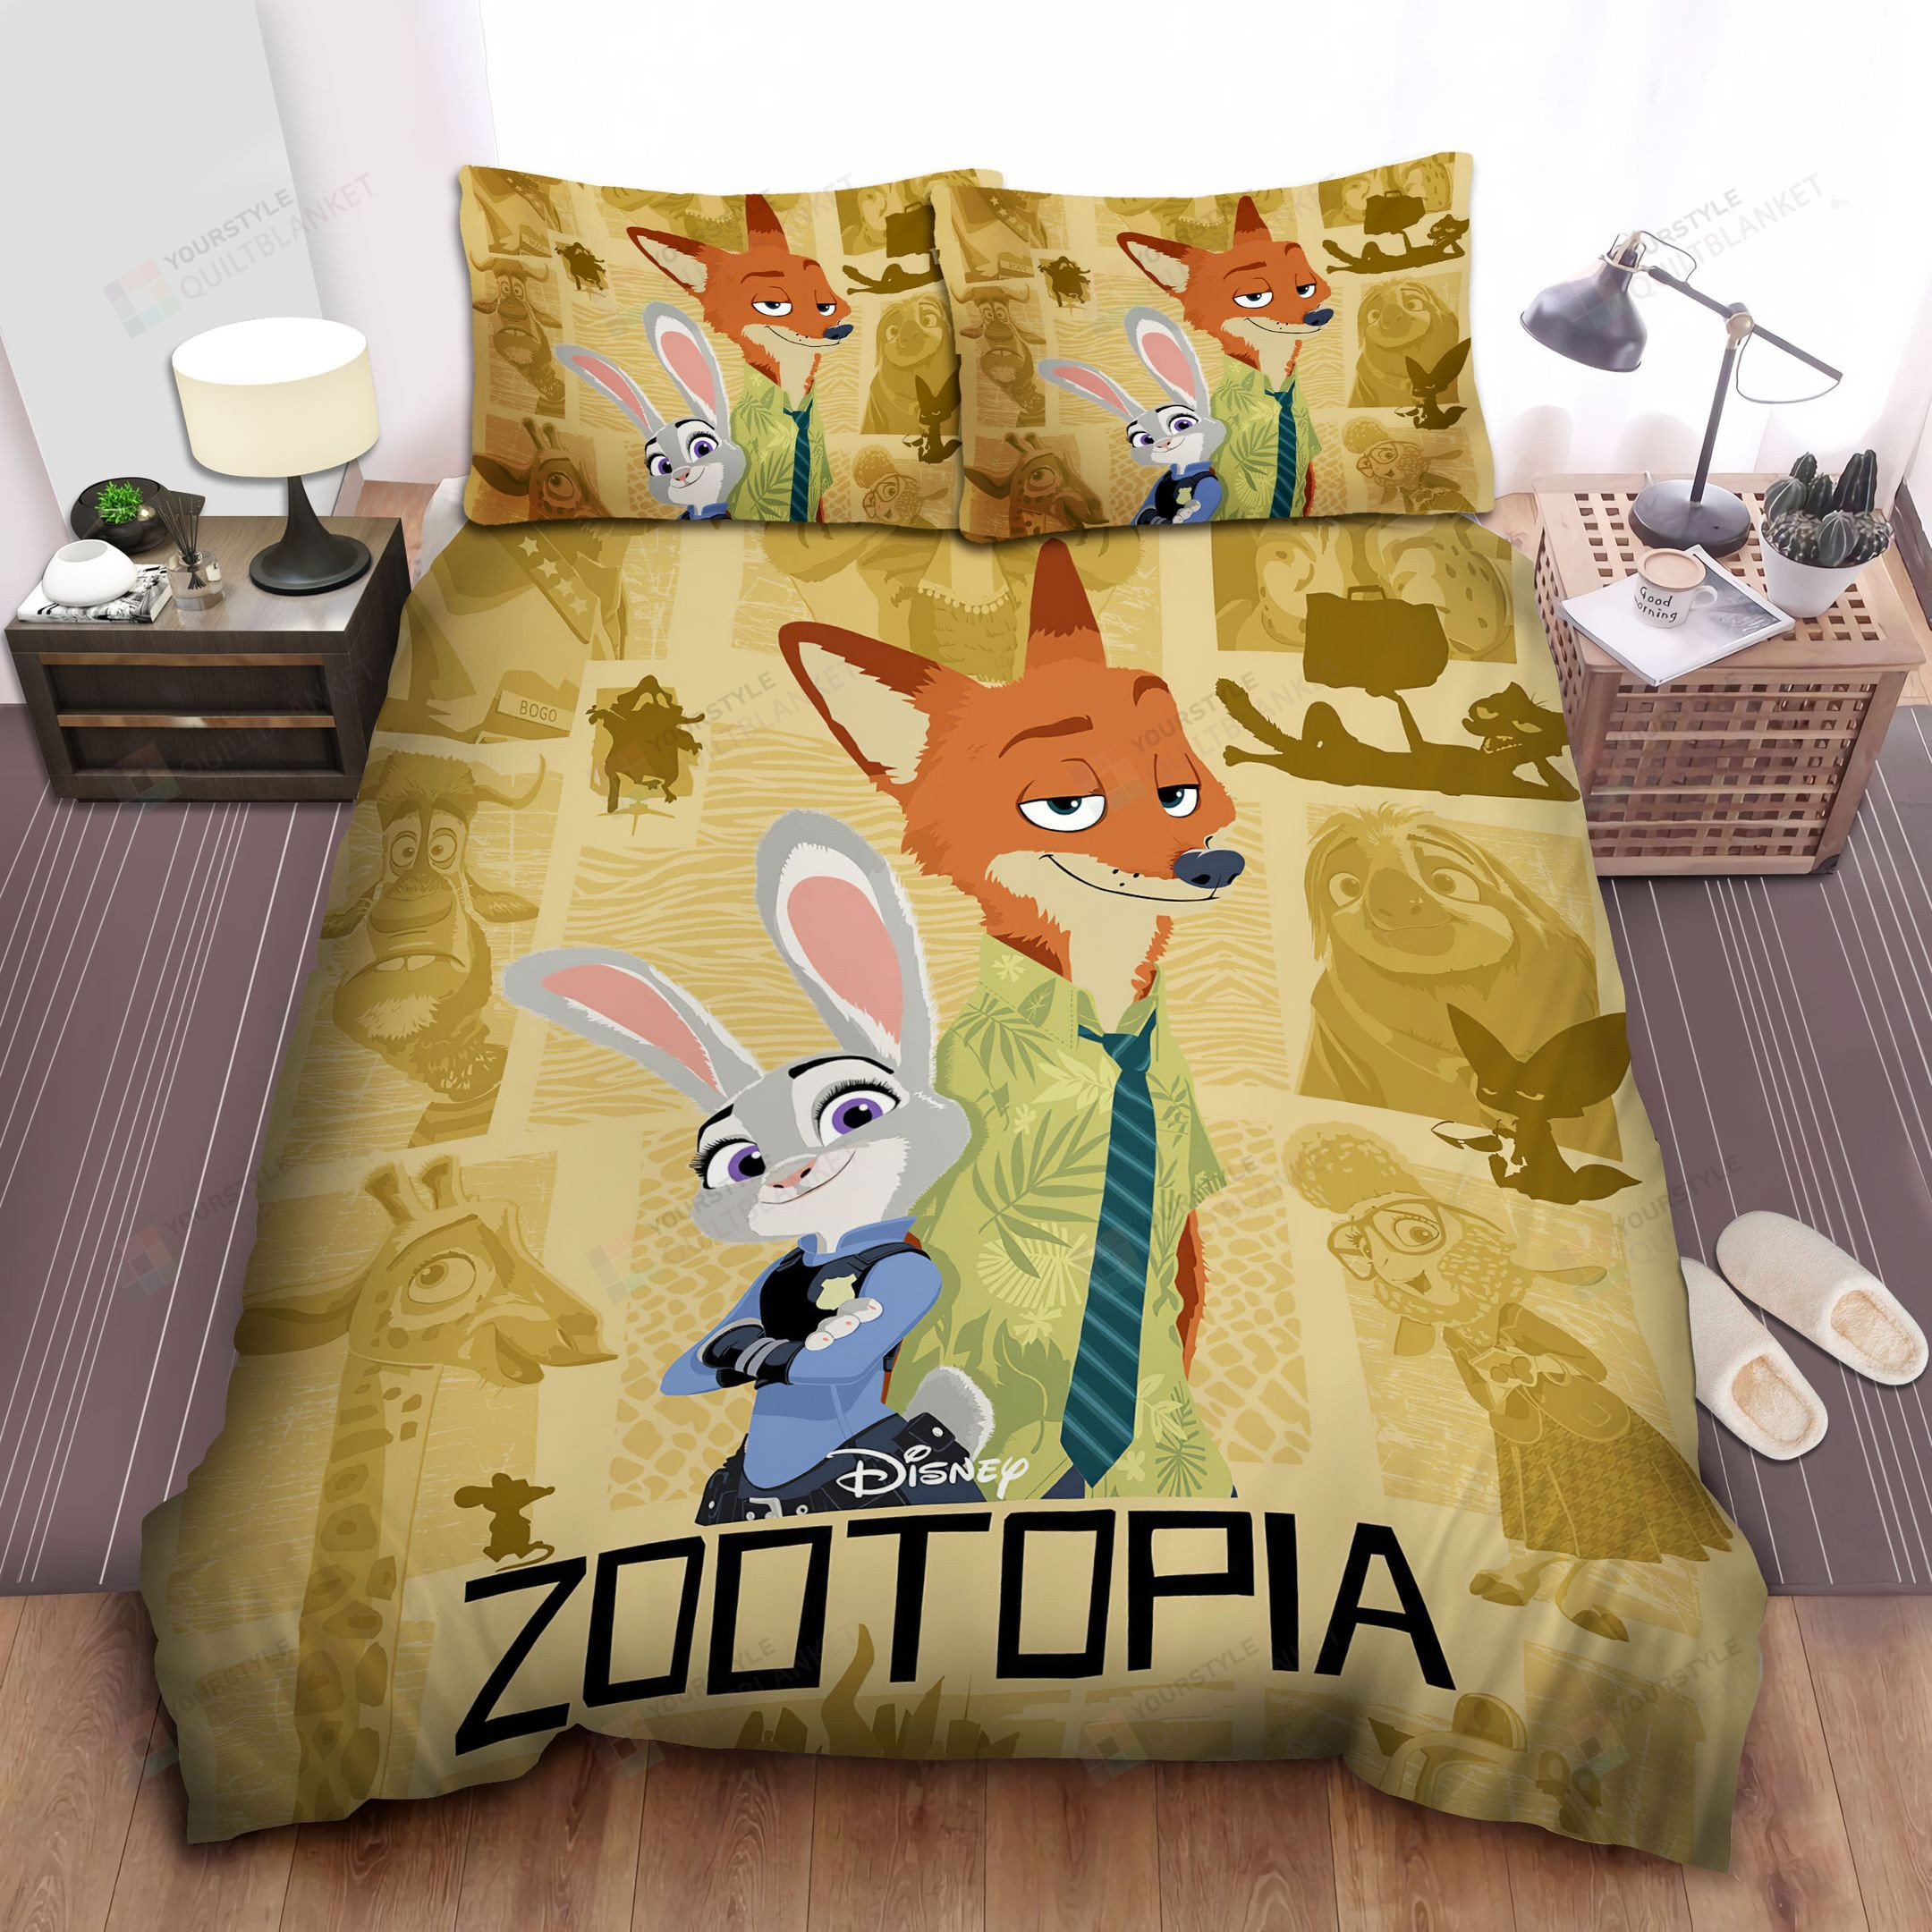 Zootopia Nick And Judy Digital Illustration Movie Poster Bedding Sets